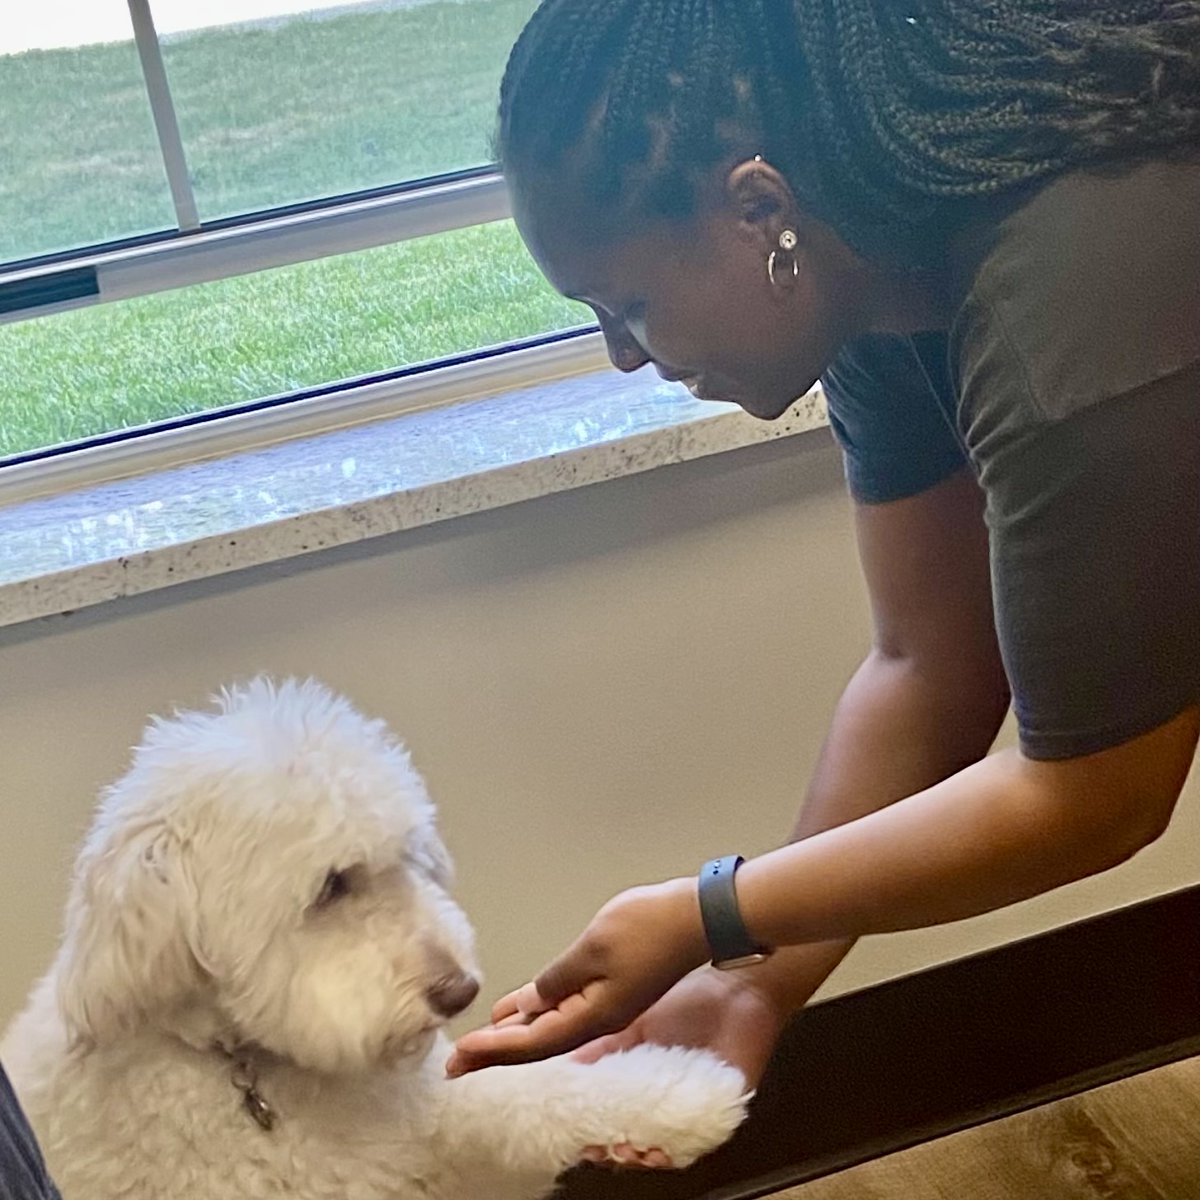 🐶Puppy cuddles make everything better, especially during finals week! 🐾 The CHHS LLC had a special visitor to help our students de-stress and recharge. Who knew studying could be this adorable? 😍